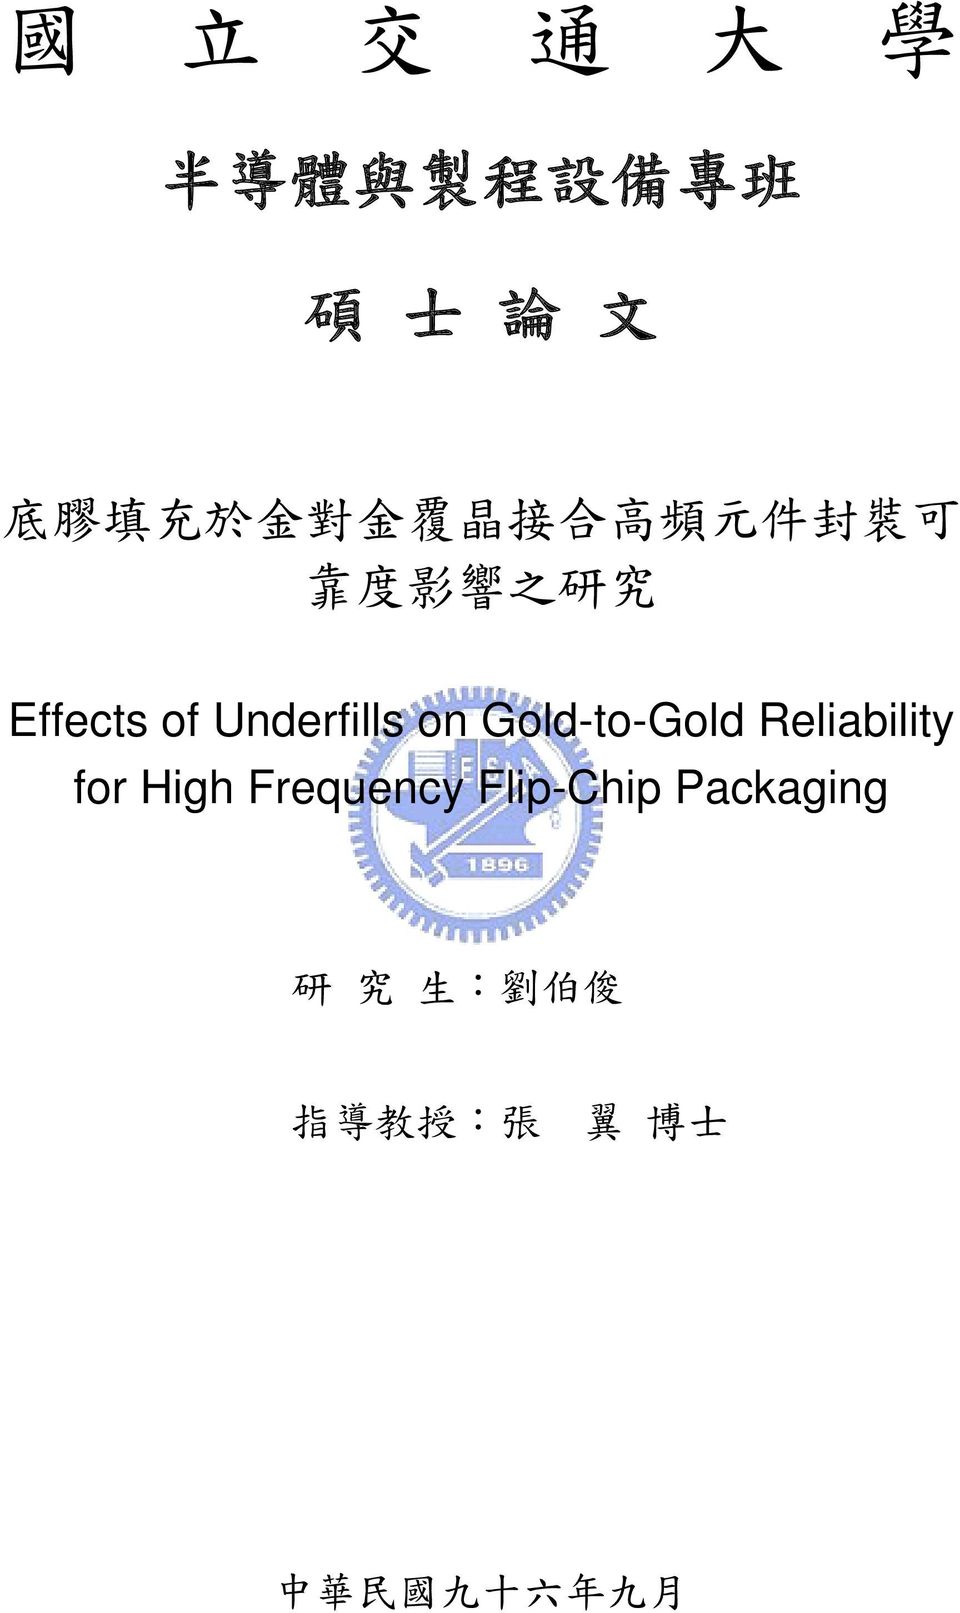 on Gold-to-Gold Reliability for High Frequency Flip-Chip